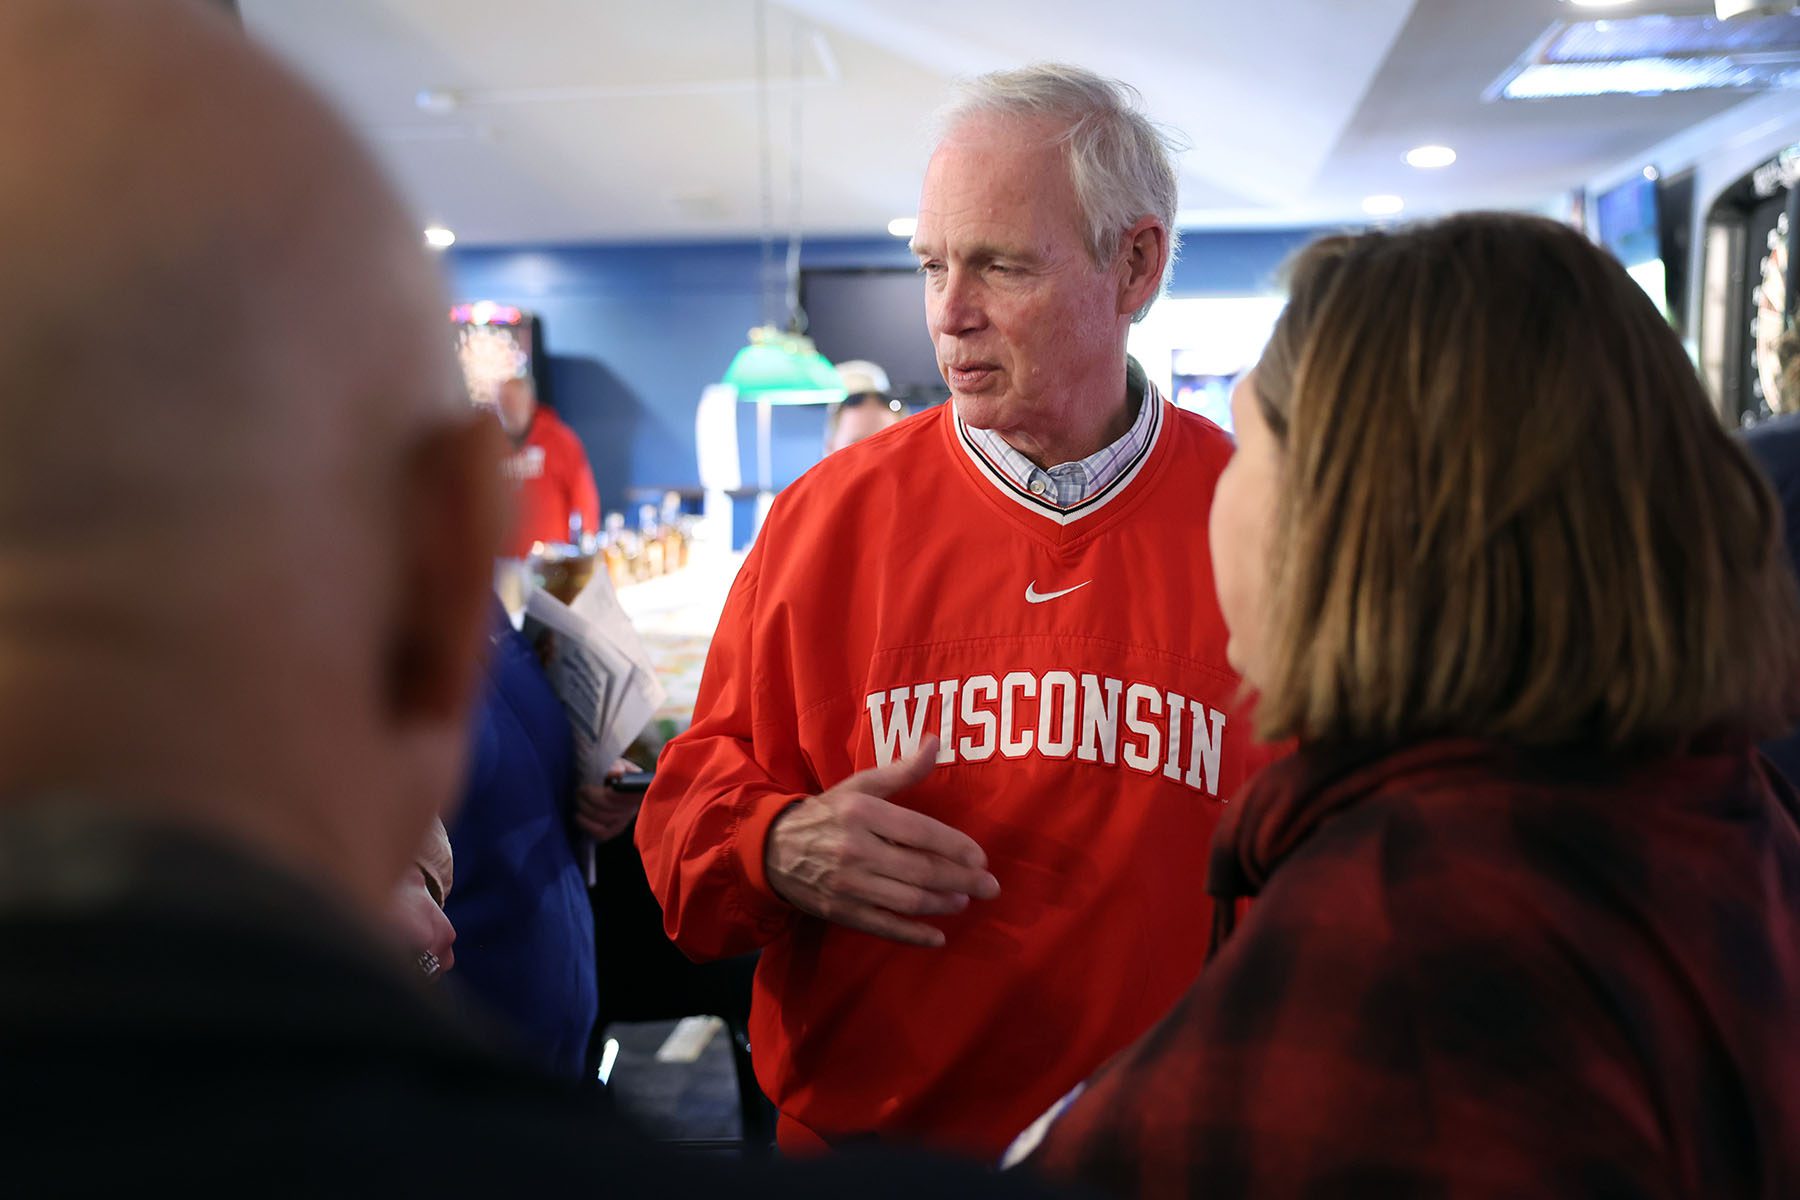 Sen. Ron Johnson greets guests during a campaign stop at the Moose Lodge Octoberfest celebration.